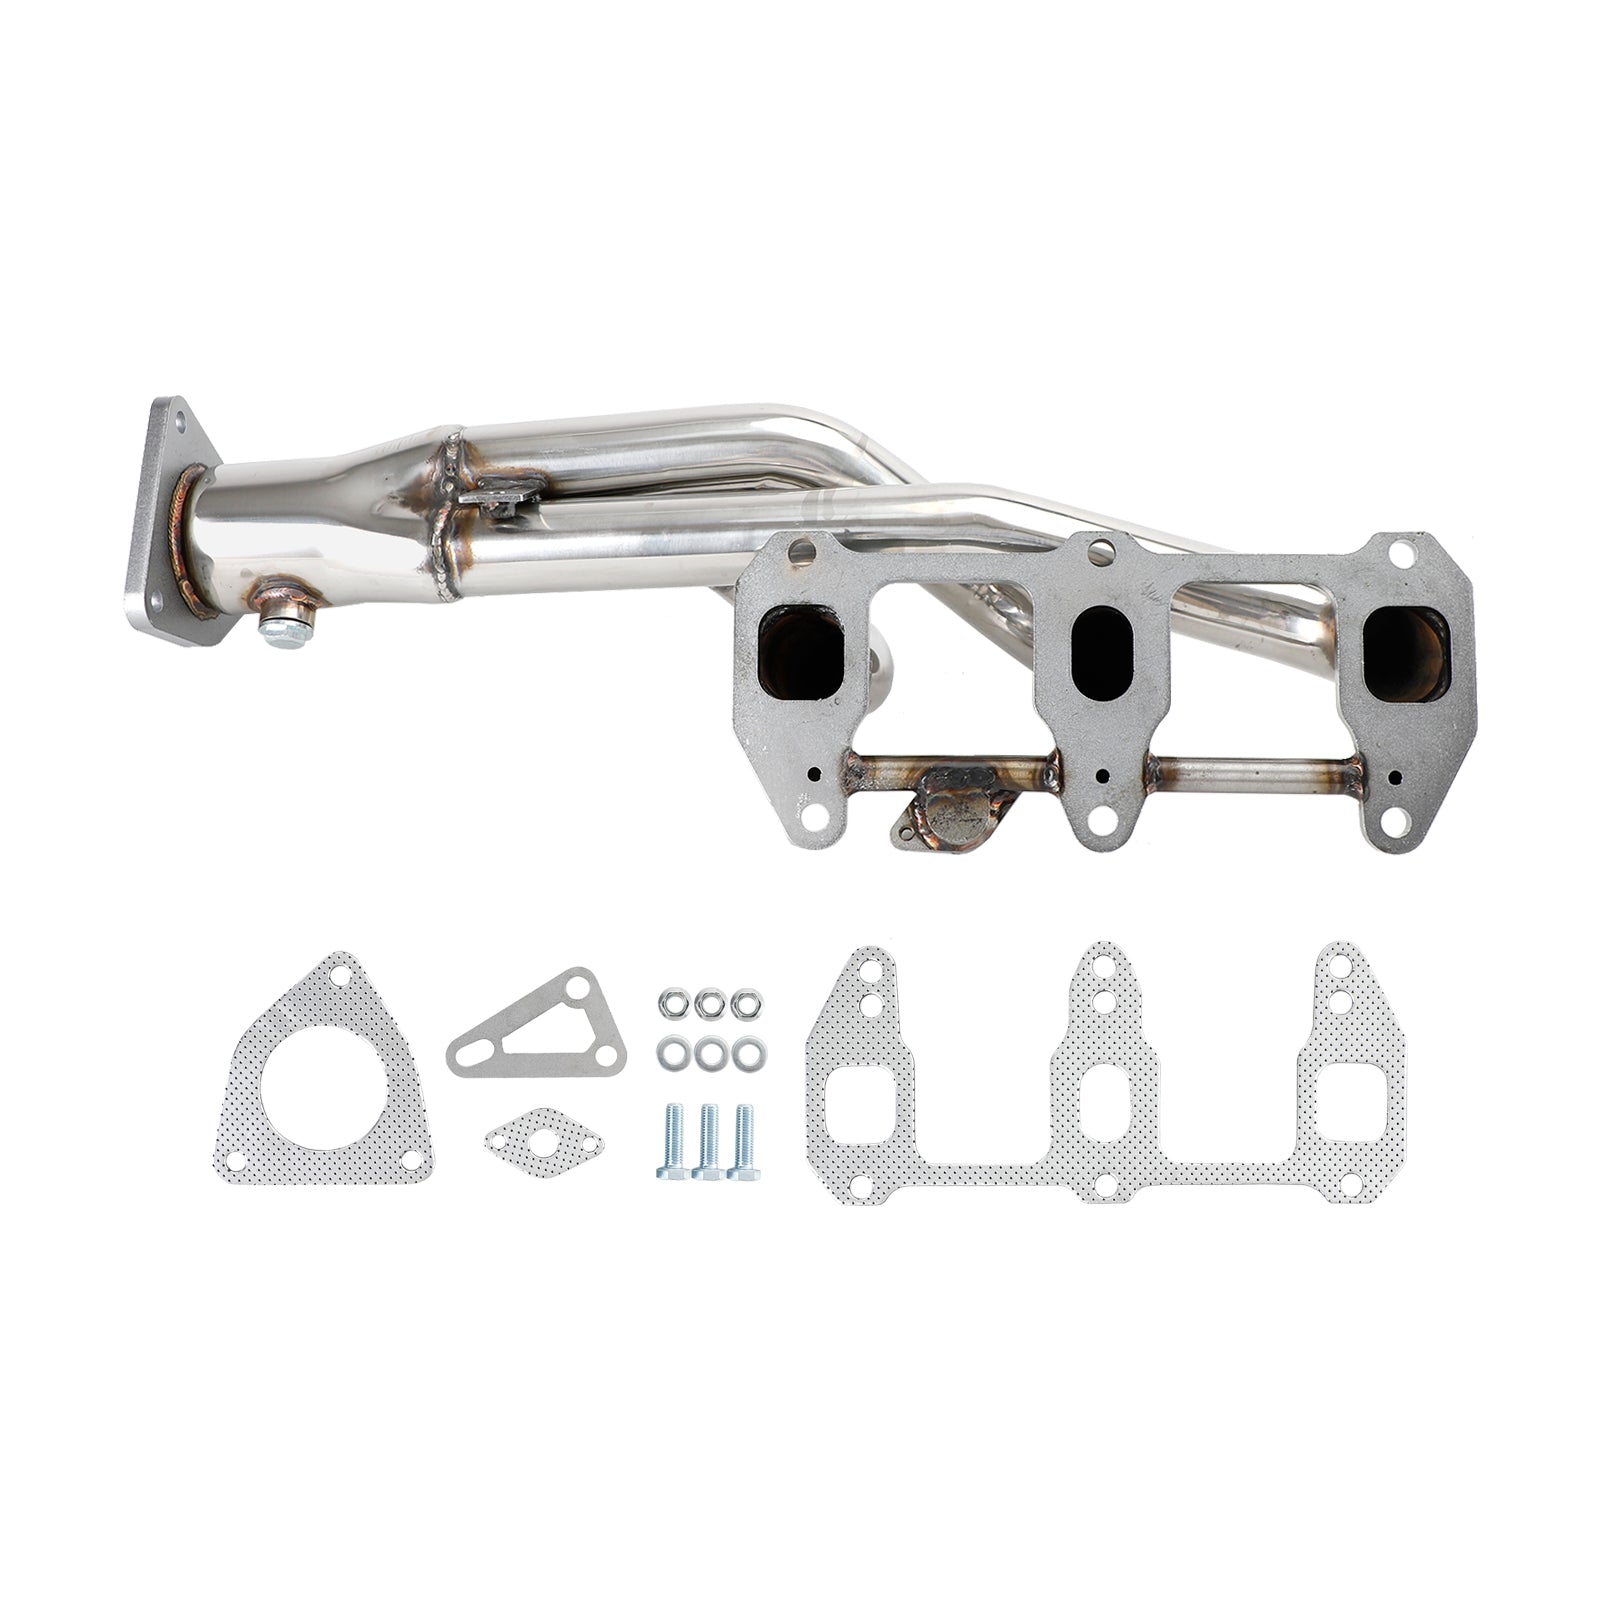 Mazda 2004-2011 RX8 RX-8 R3 GT Grand Stainless steel Exhaust Header